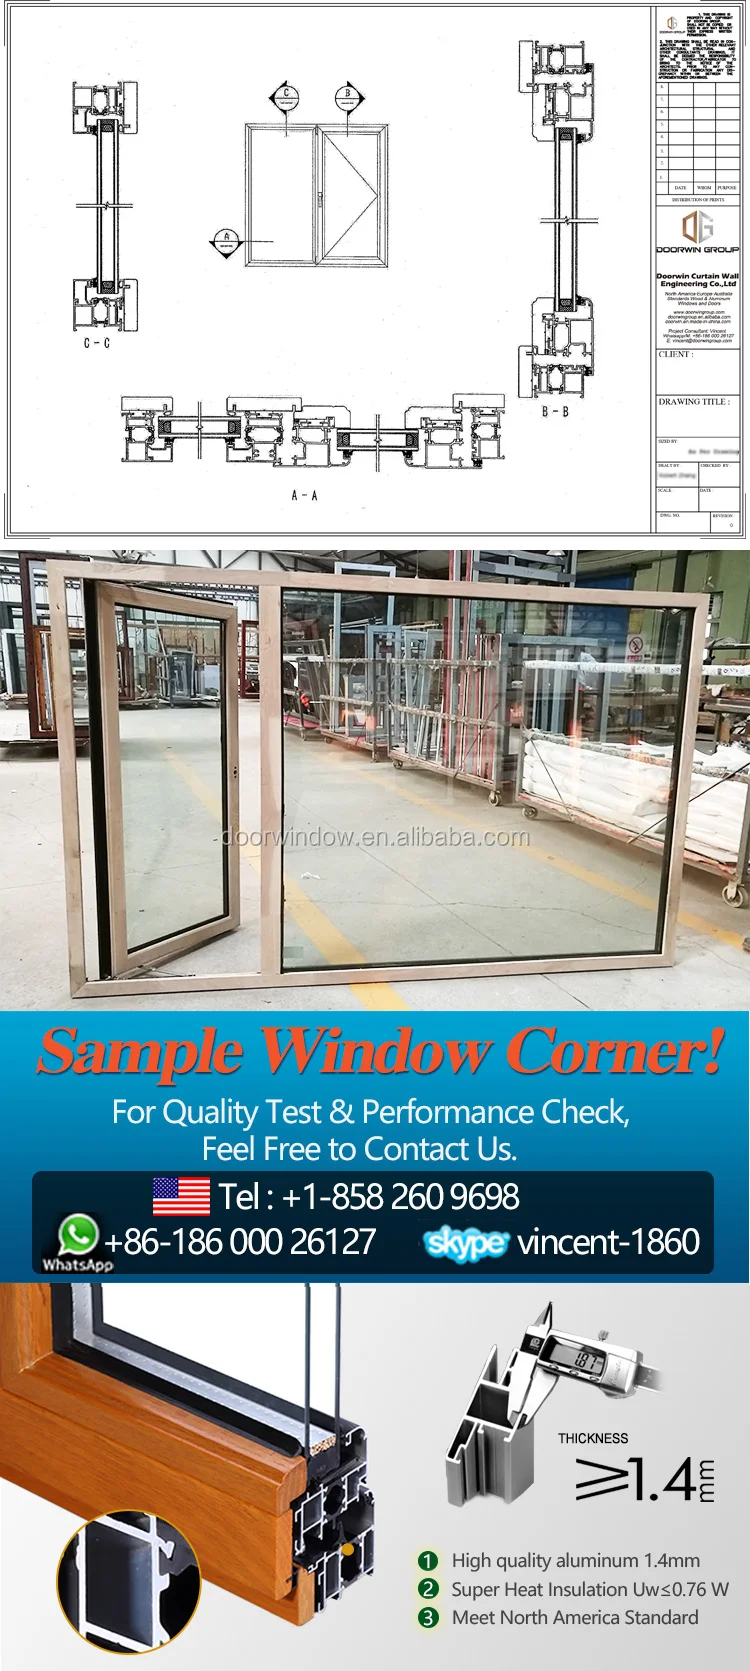 China Good Aluminum residential awning top hung Windows window with Chinese hardware AS2047 CE AS1288 certificate